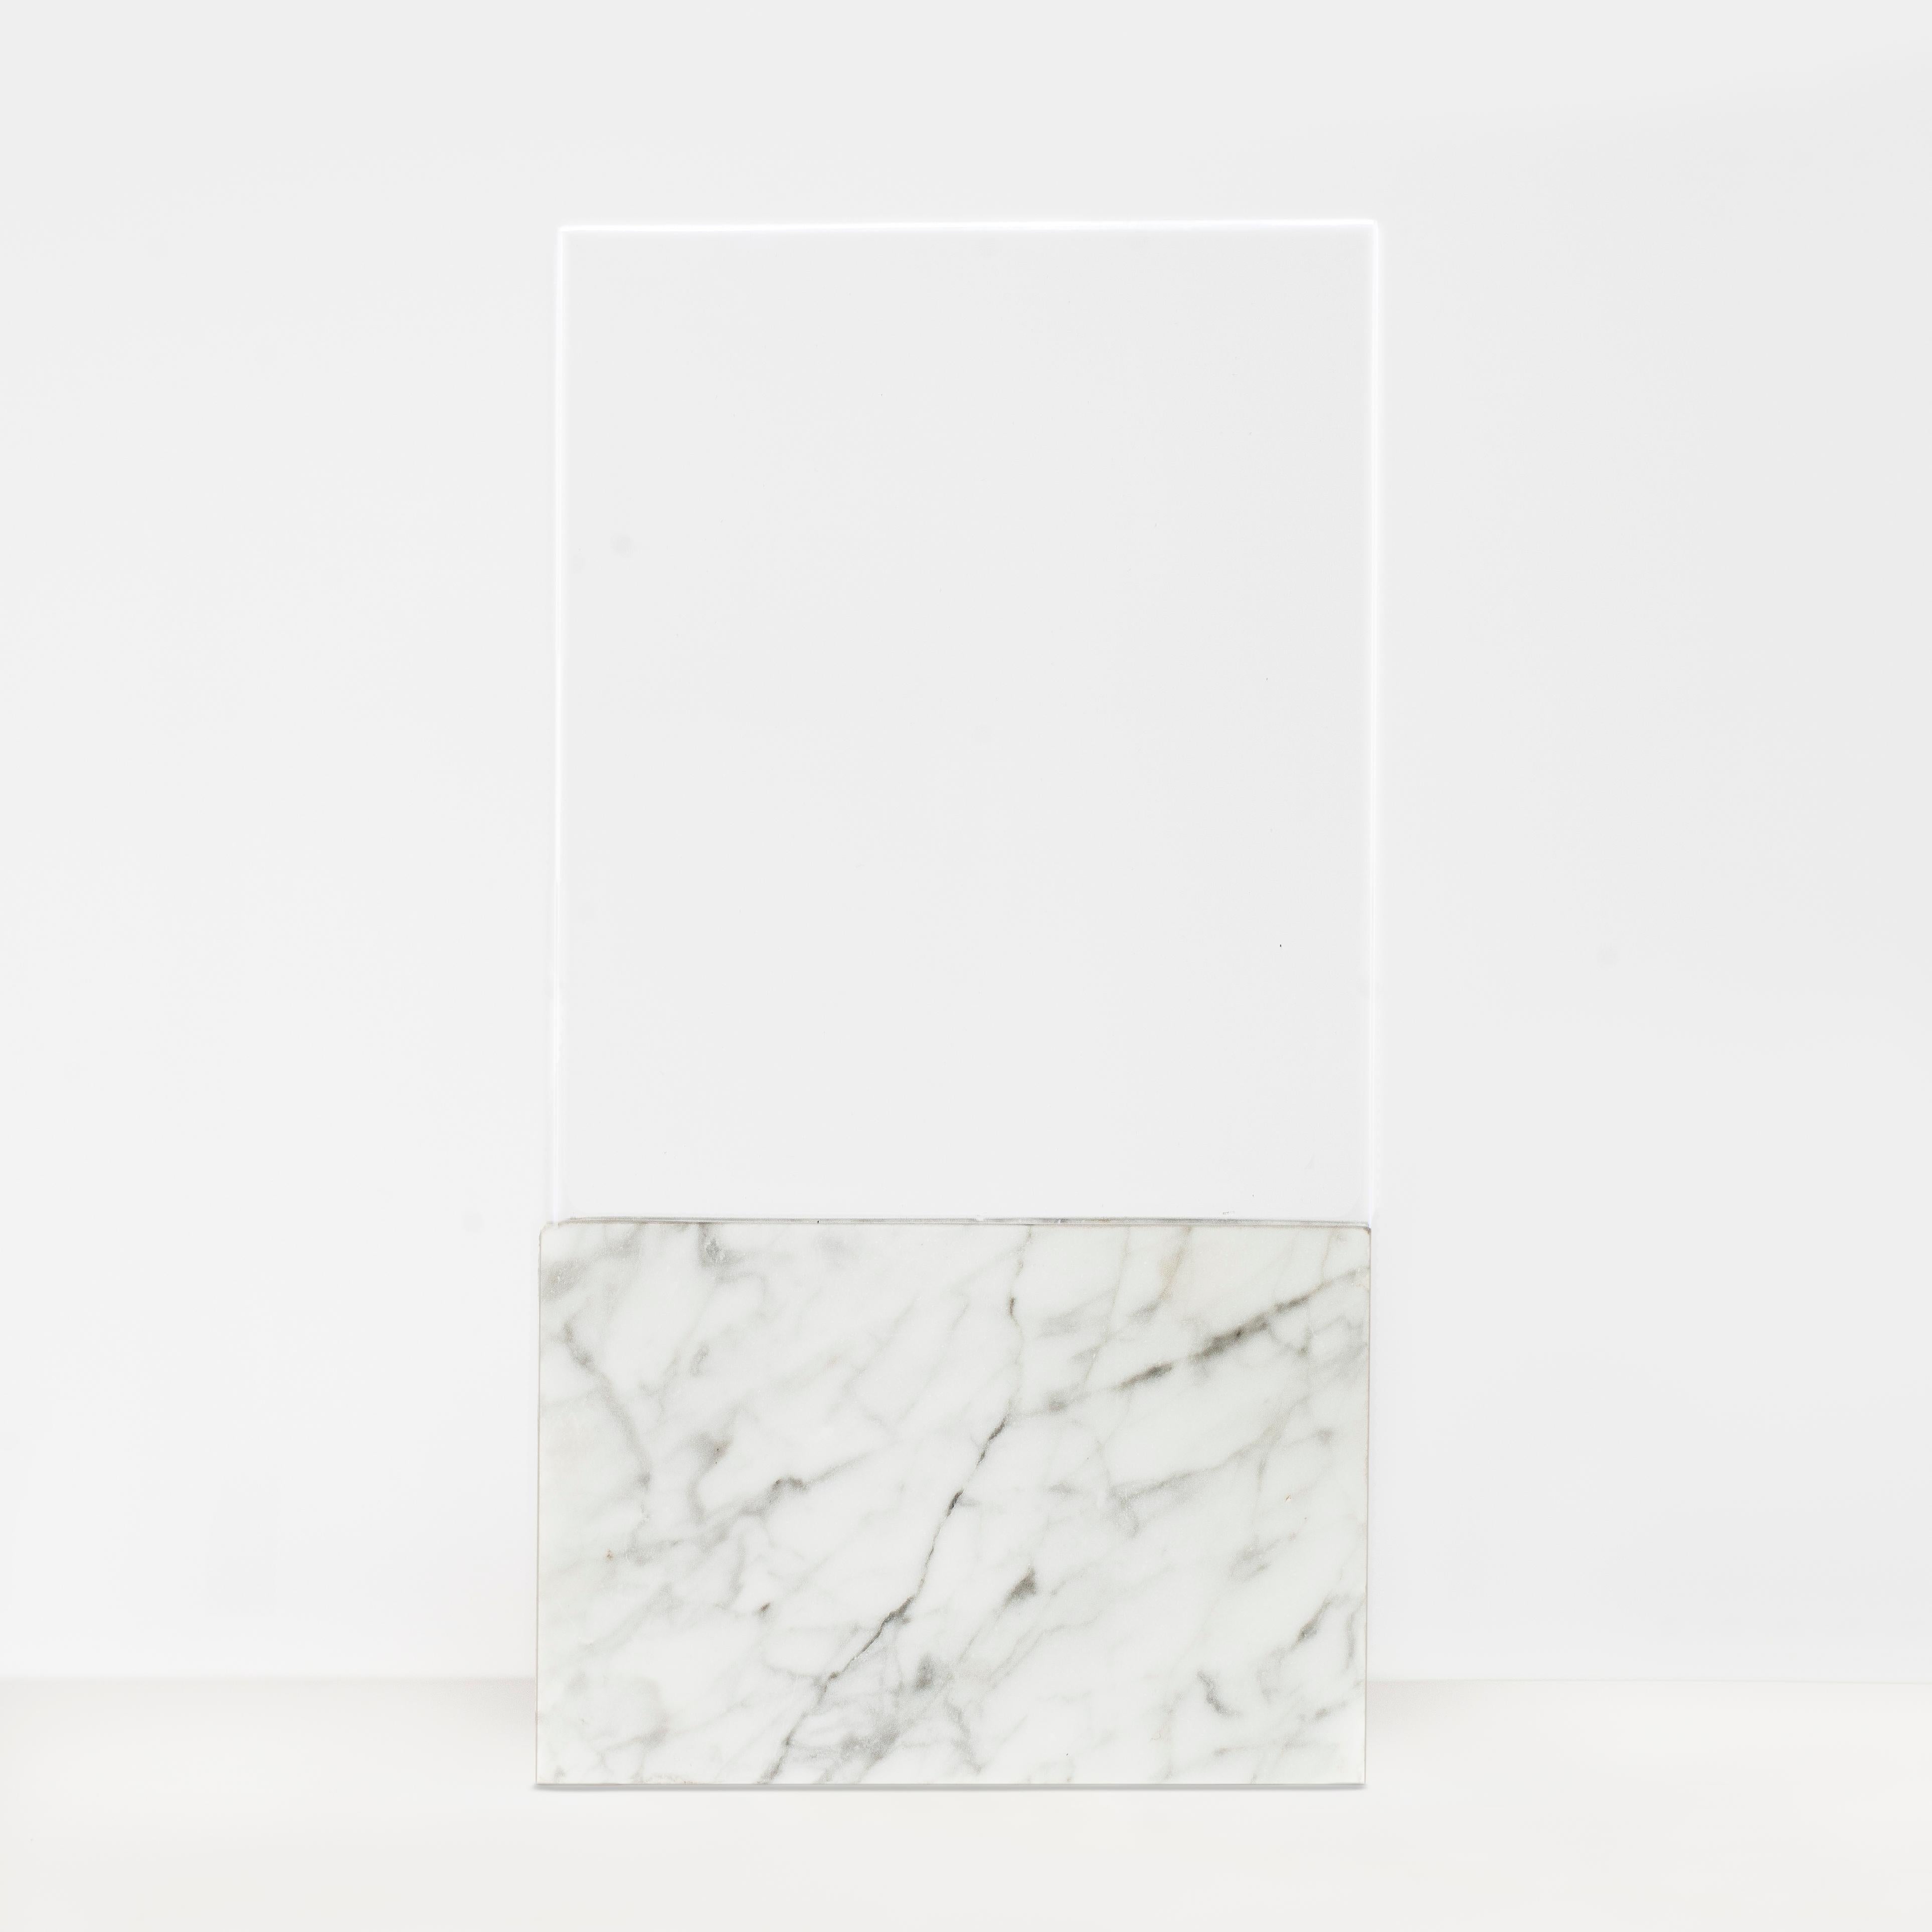 Black Horizon, glass and marble table lamp by Carlos Aucejo
Dimensions: 36 x 19 x 7 cm
Materials: Glass and marble, (Exist in Marquina (black) and Carrara (white)). 

In this piece, we try to create a luminous atmosphere in the space through the LED